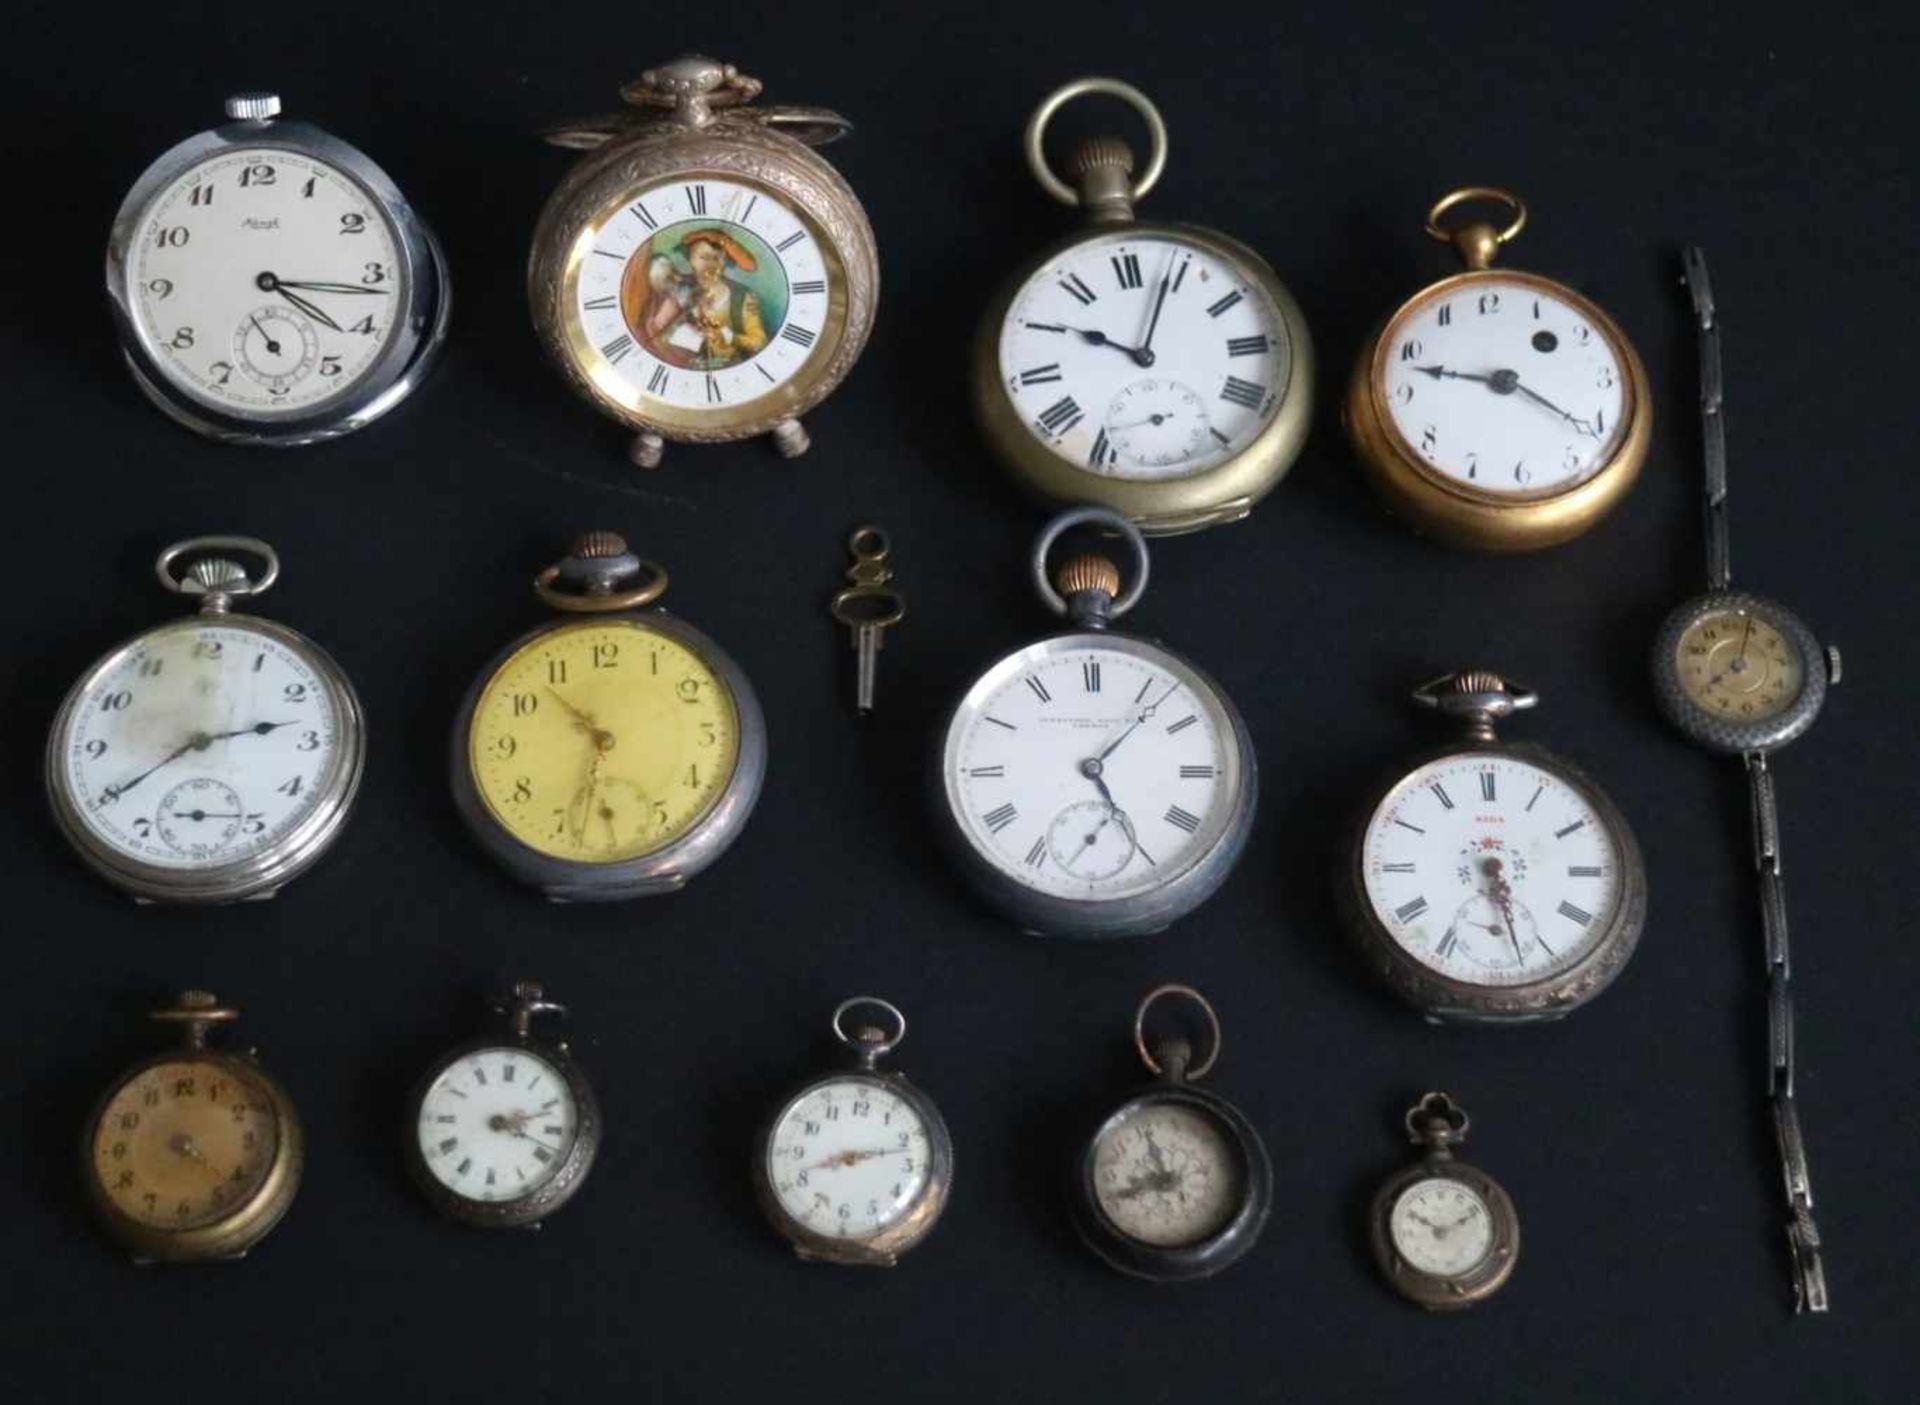 Lot of pocket watchesLot of pocket watches